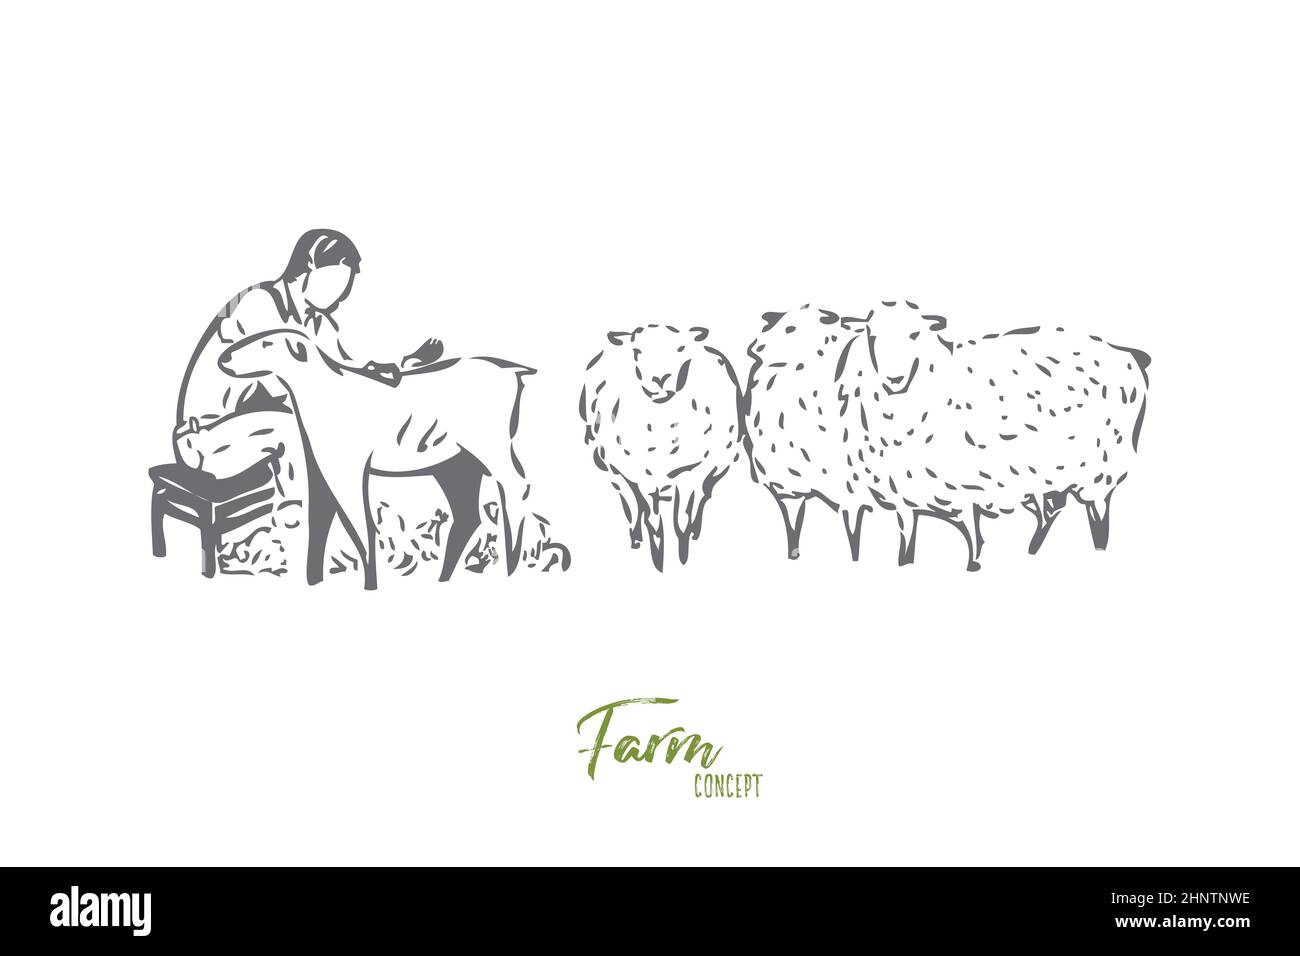 Collecting wool concept sketch. Man, livestock worker, farmer shearing sheep. Looking after farm animals. Countryside lifestyle jobs, responsibilities Stock Photo